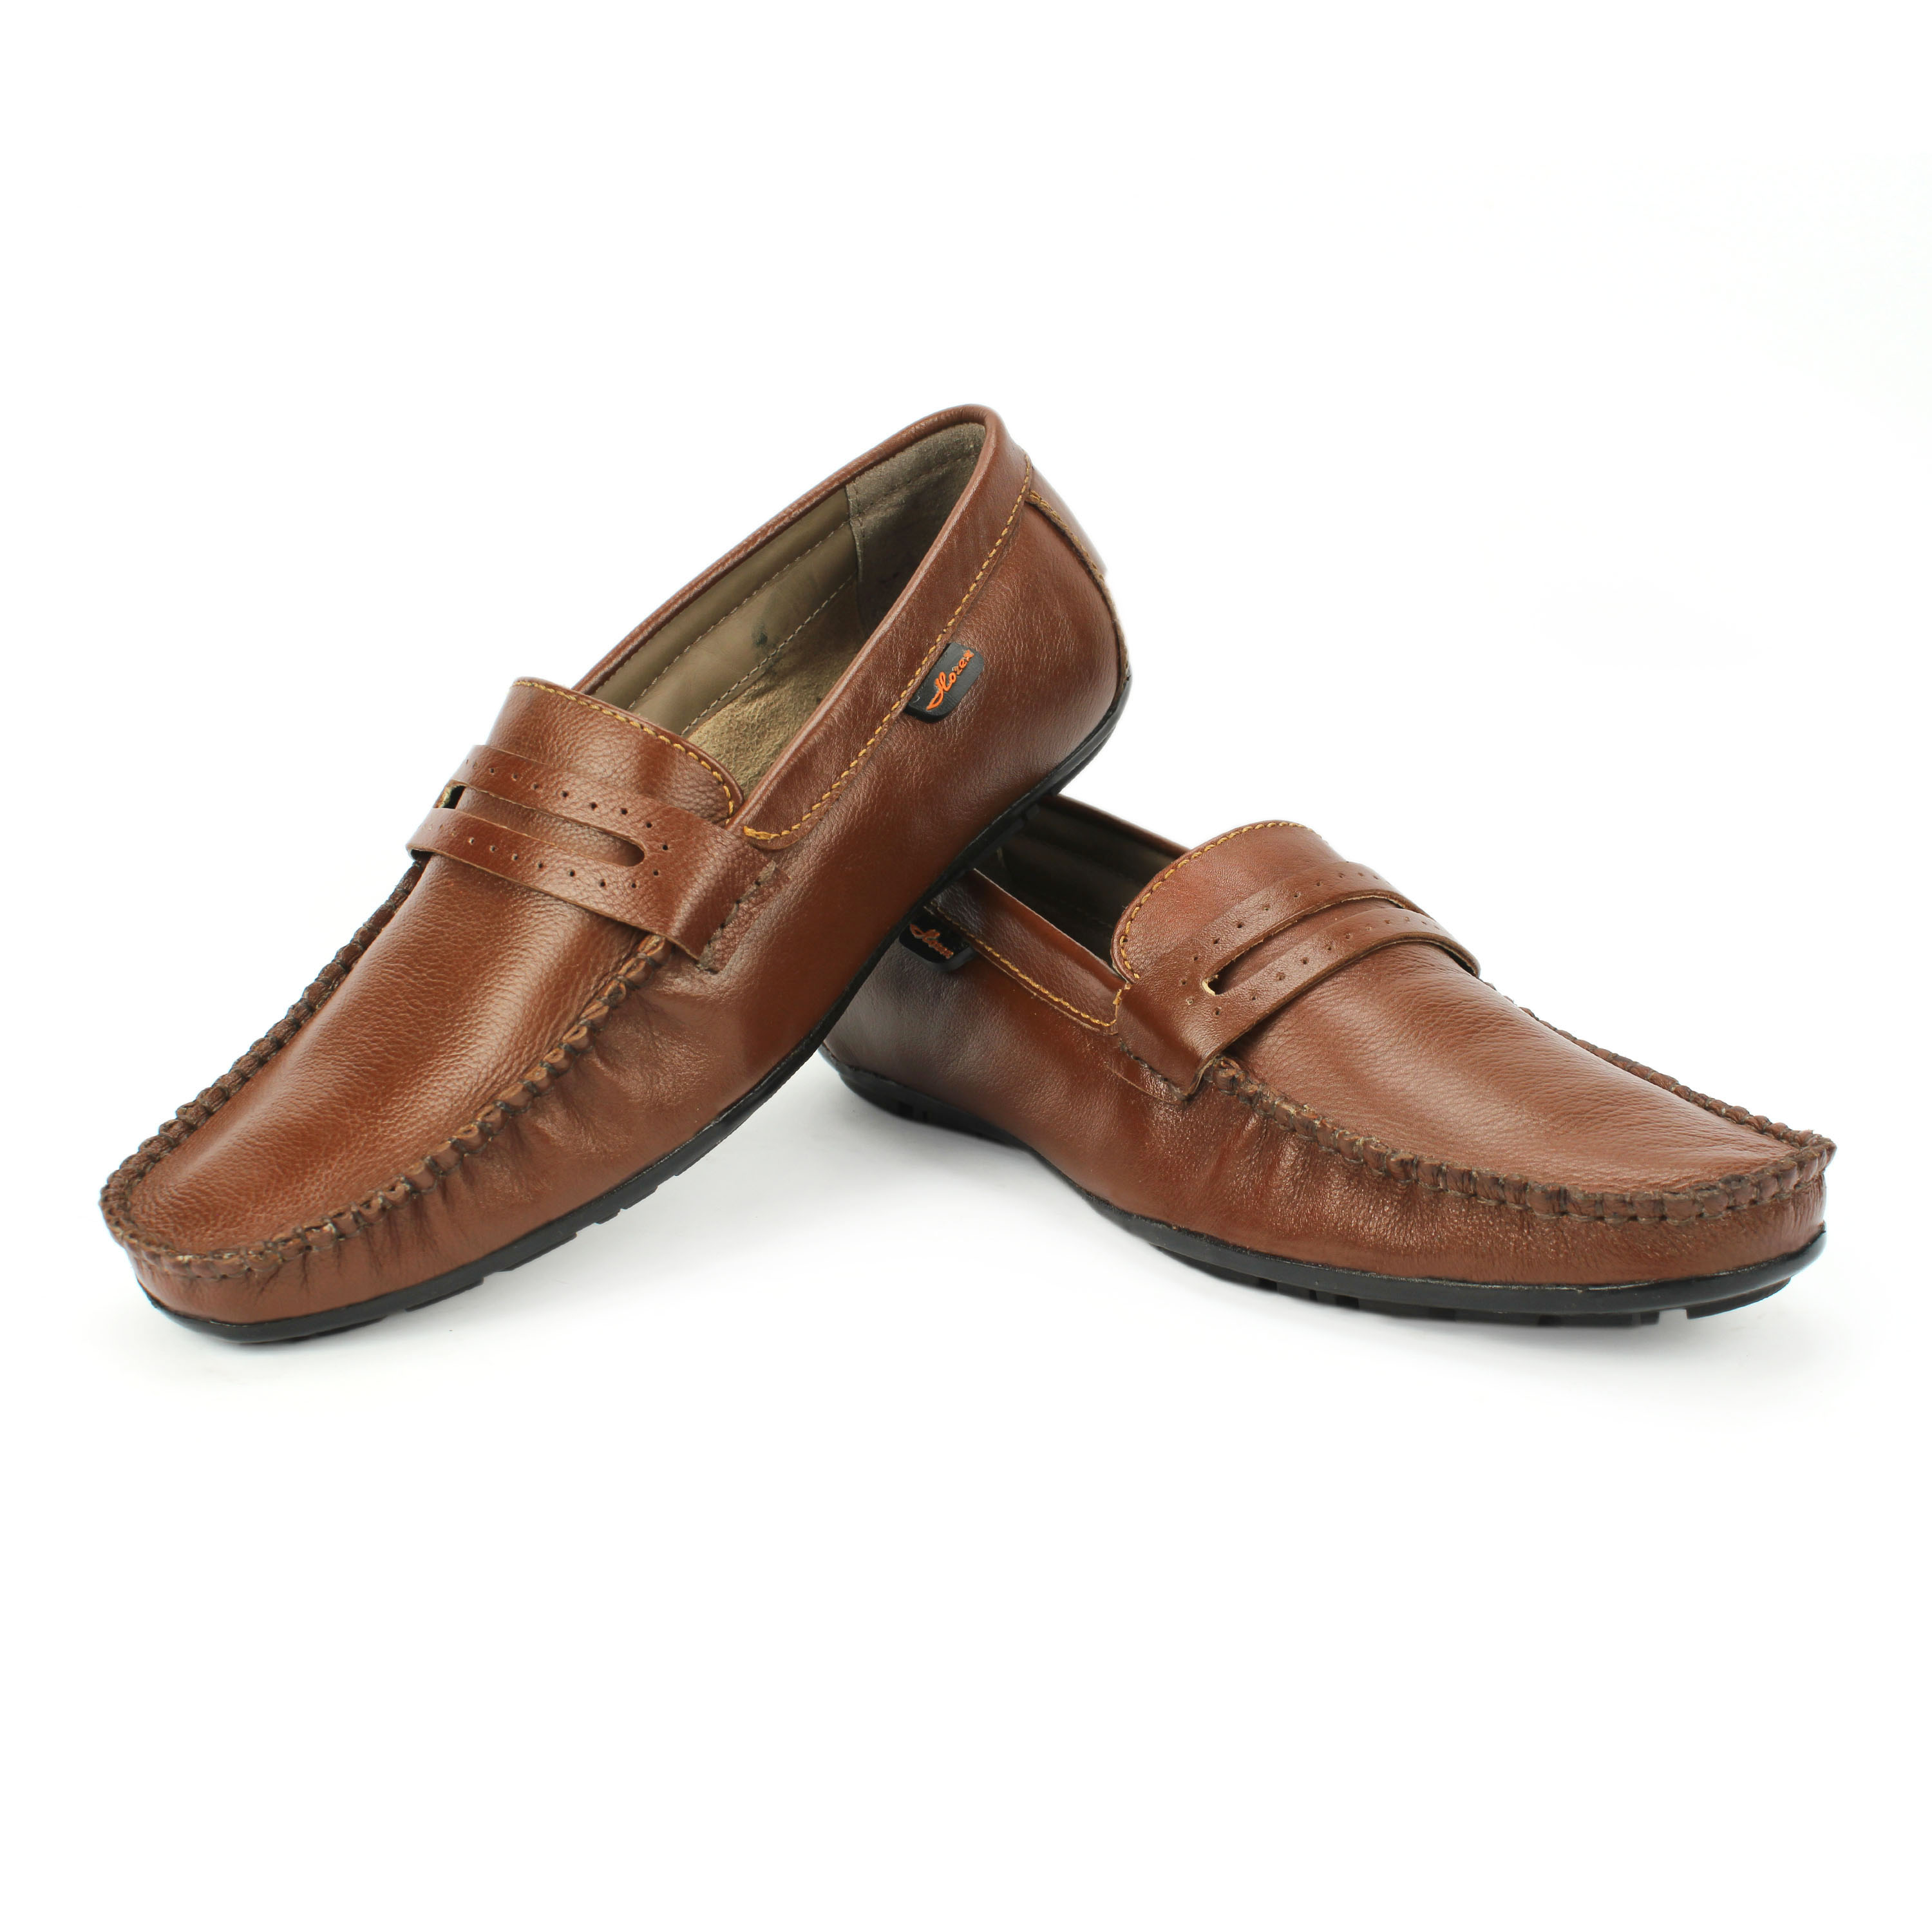 Tan Loafers For Men In Pure Leather Online Shopping Horex® 7086